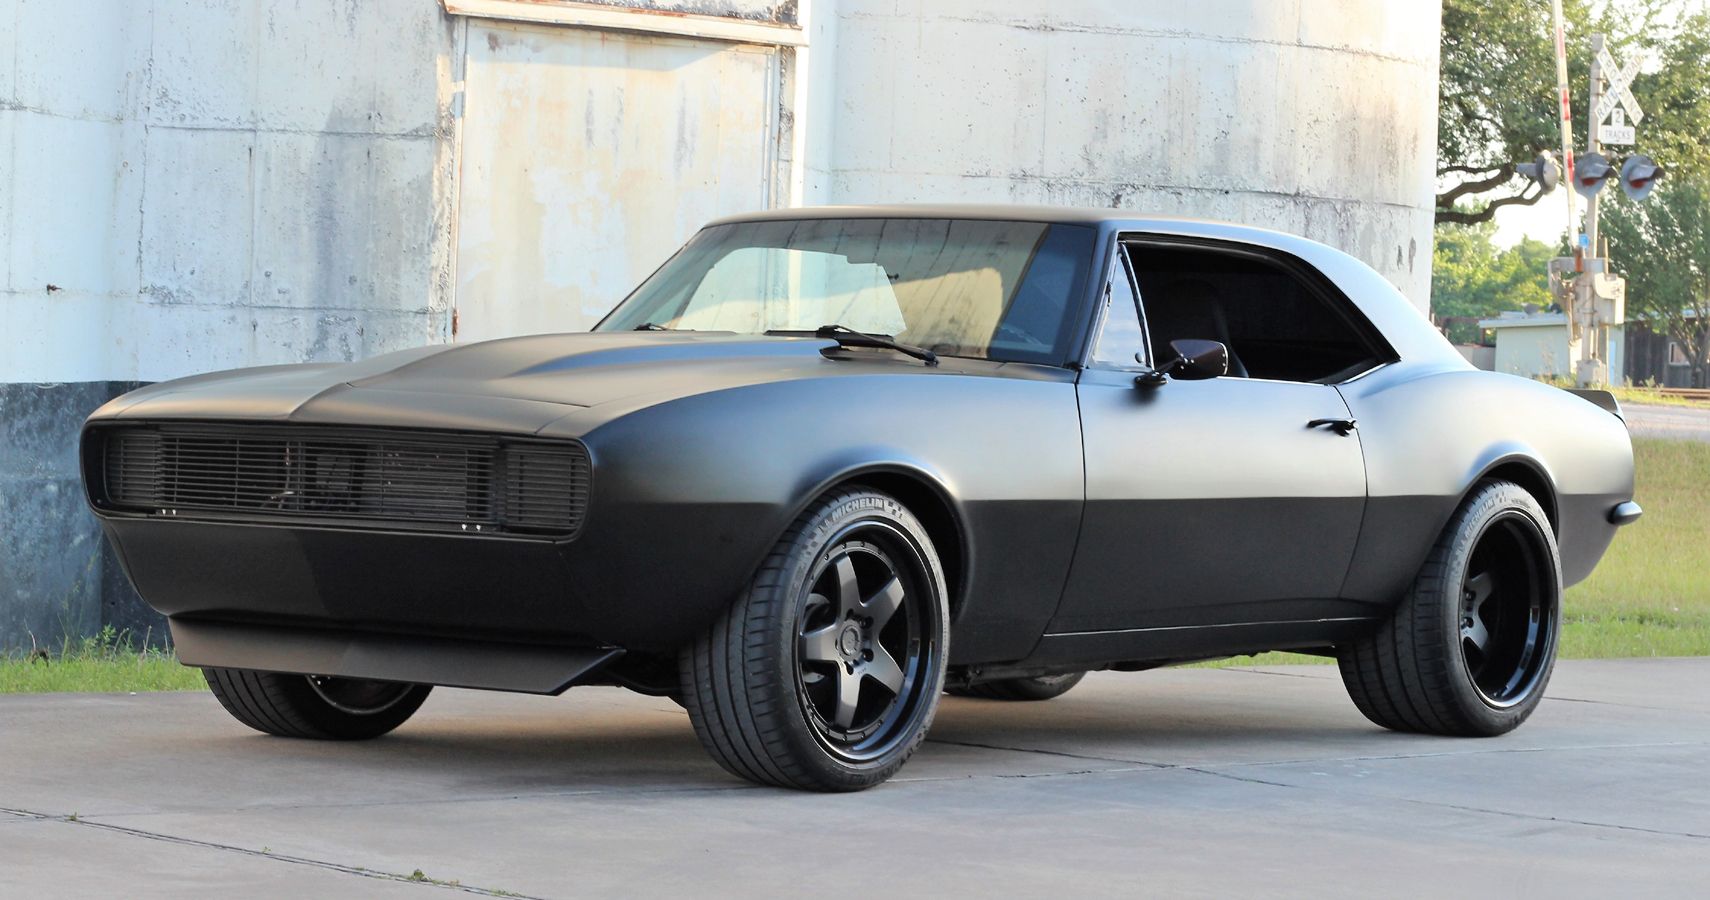 10 Most Badass Classic American Cars To Buy And Restore For Cheap